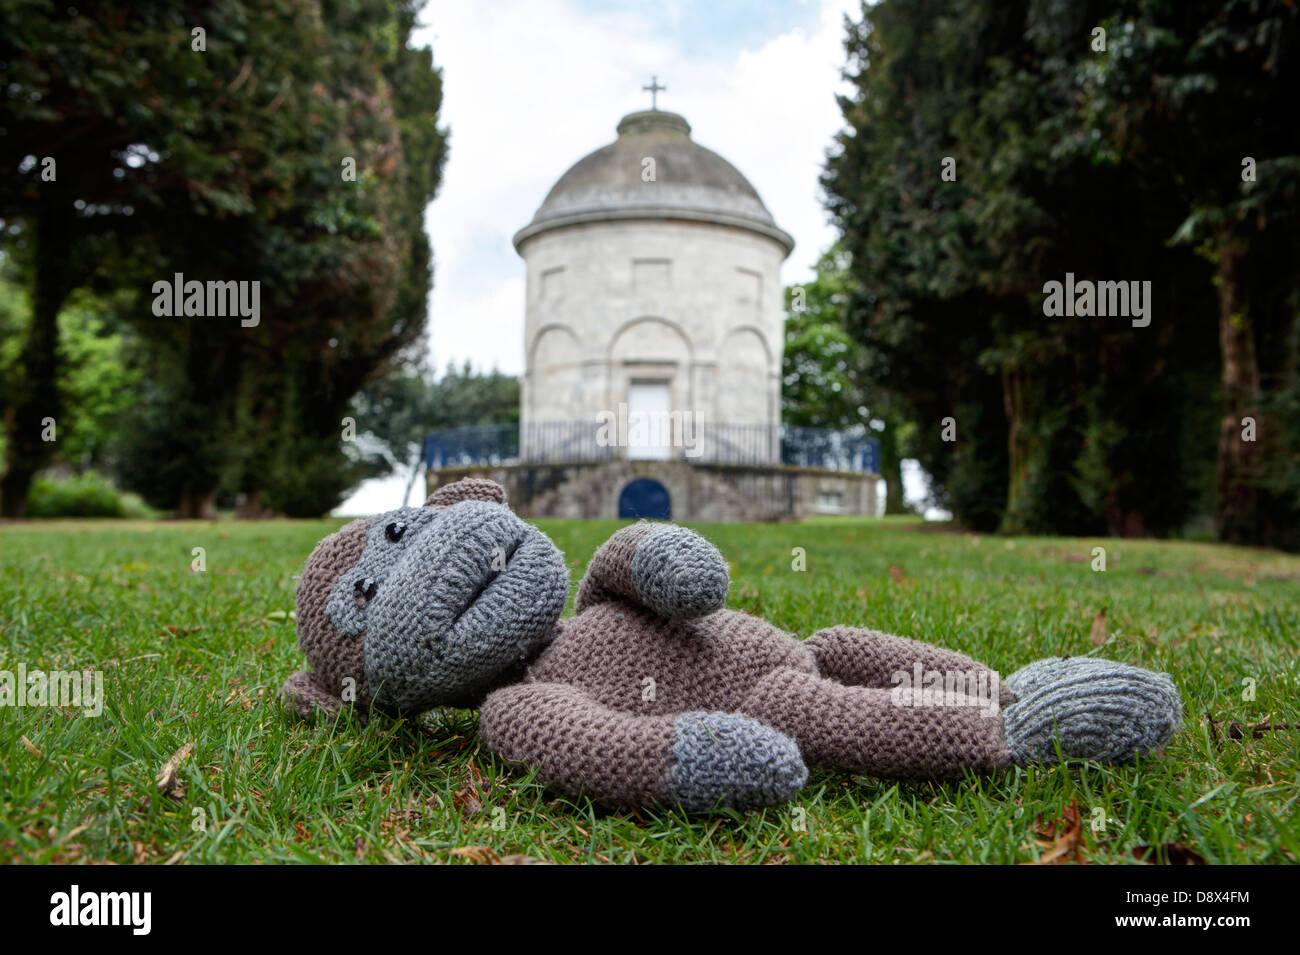 Image from Arcanum series showing dropped soft toy on public land, open to viewers interpretation. Stock Photo